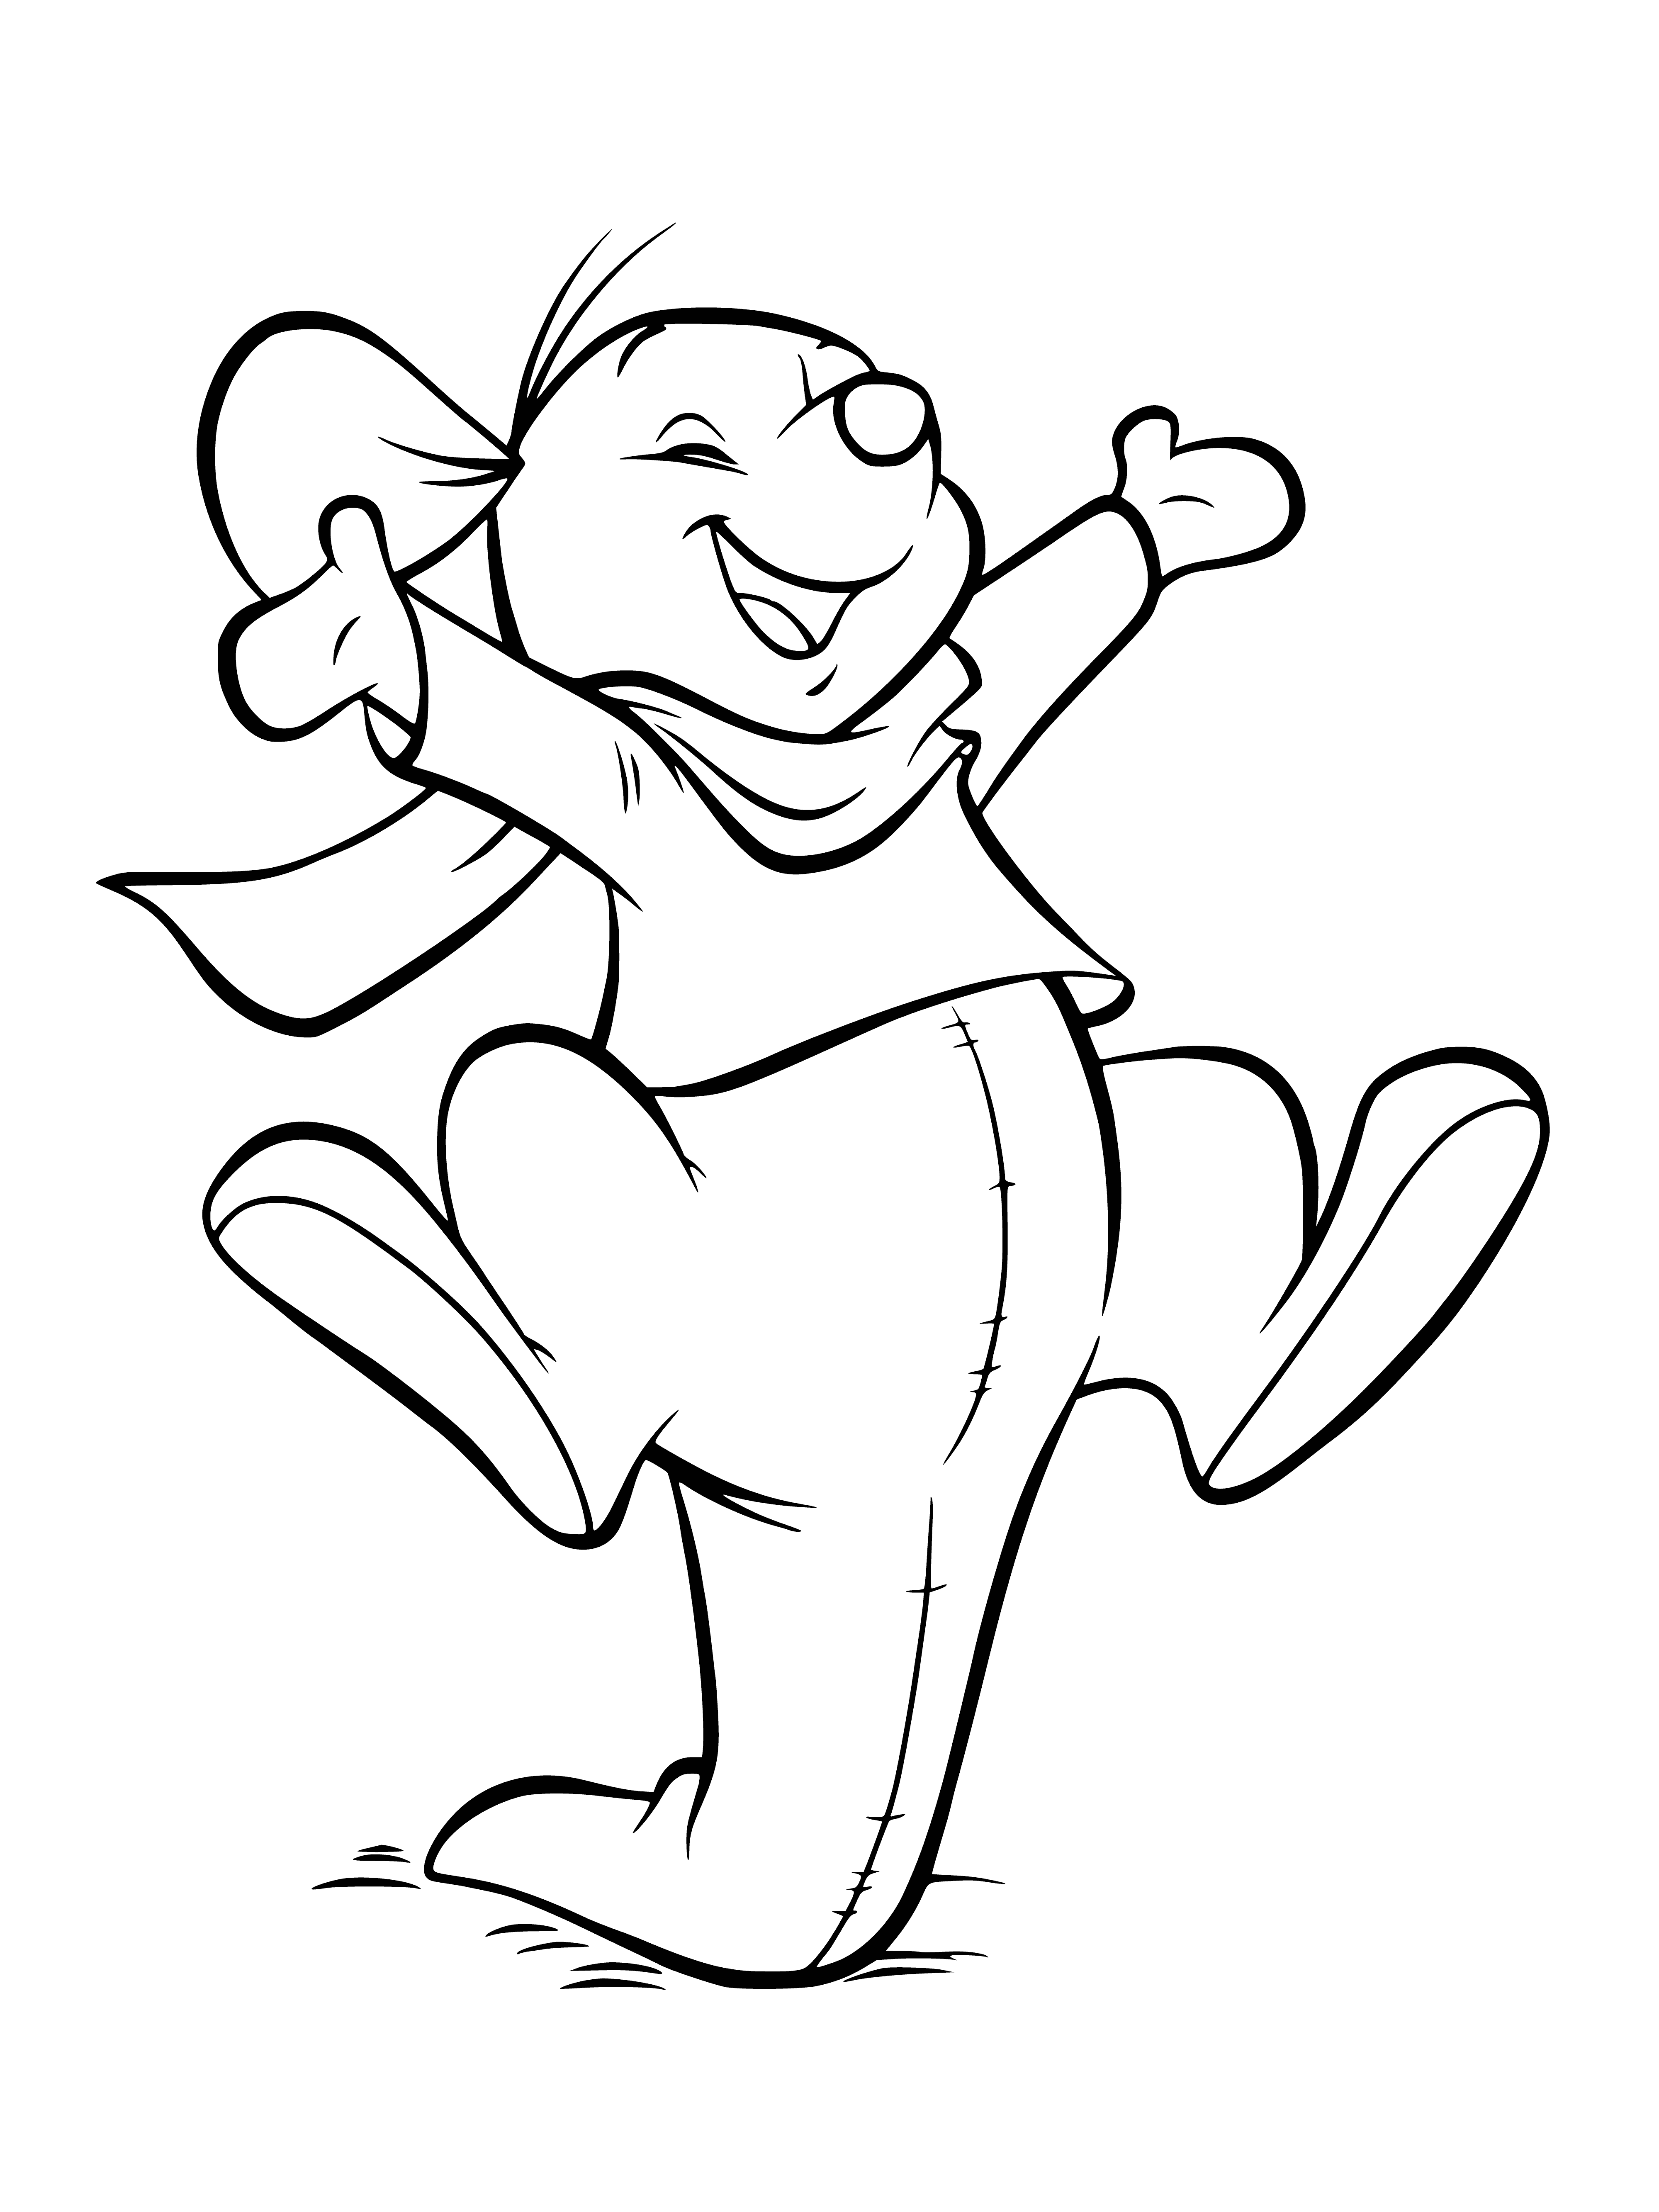 coloring page: Kangaroo chases Winnie the Pooh in coloring page; kangaroo big and muscular, Winnie scared and small, no muscles.